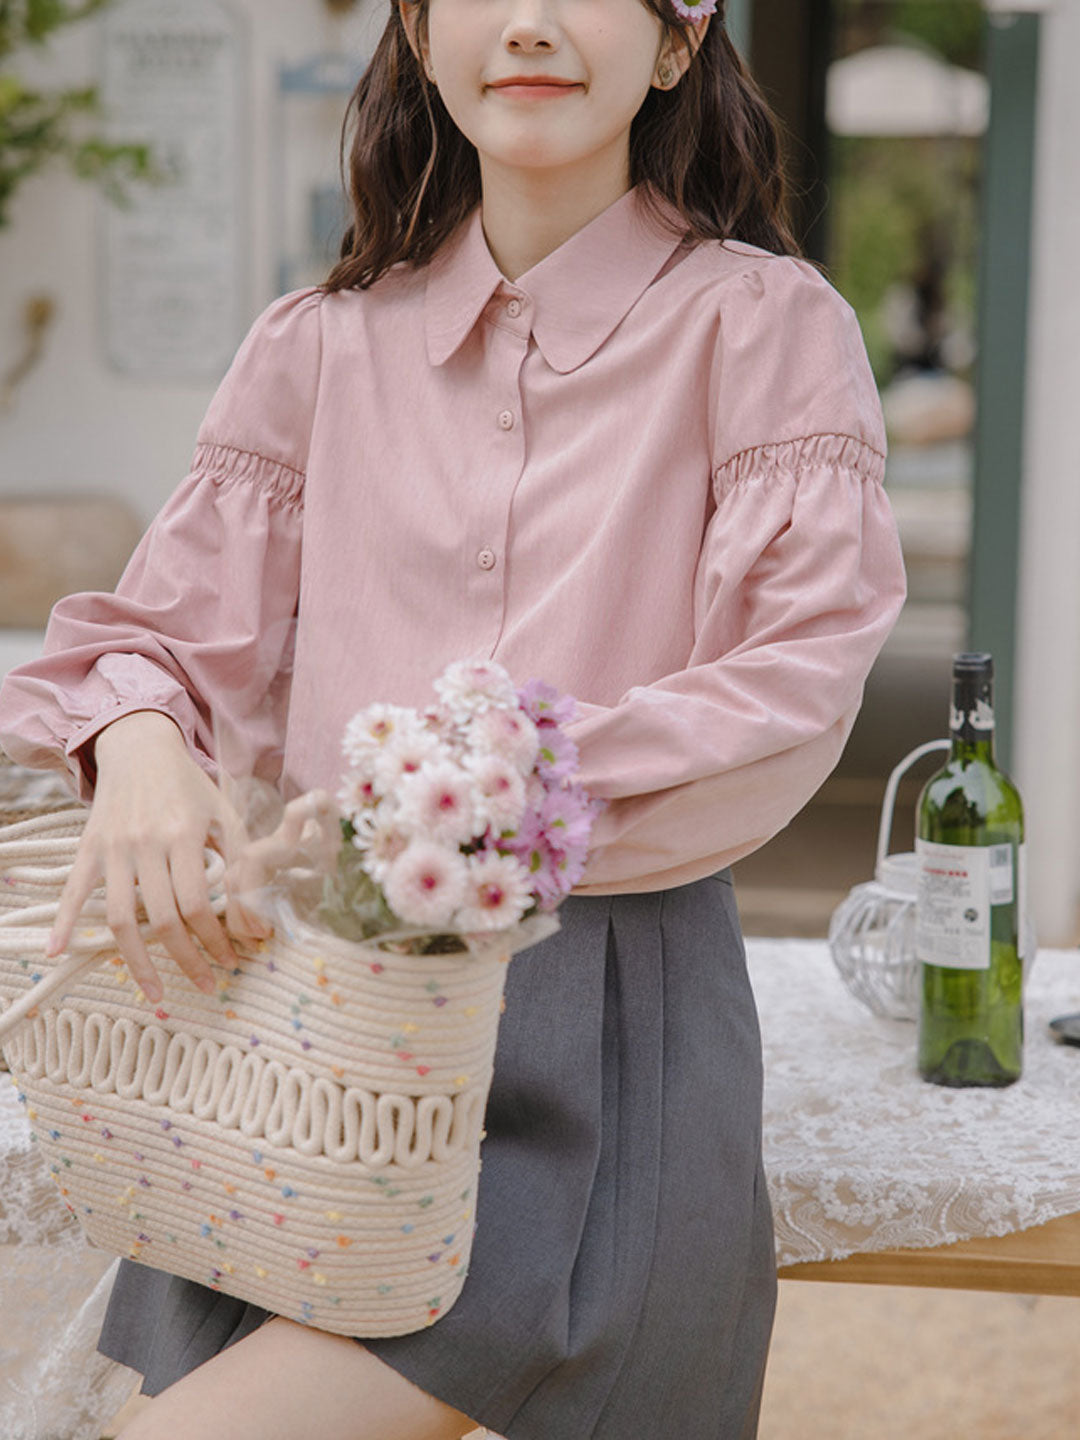 Claire Loose Solid Color Lapel Lantern Sleeve Shirt